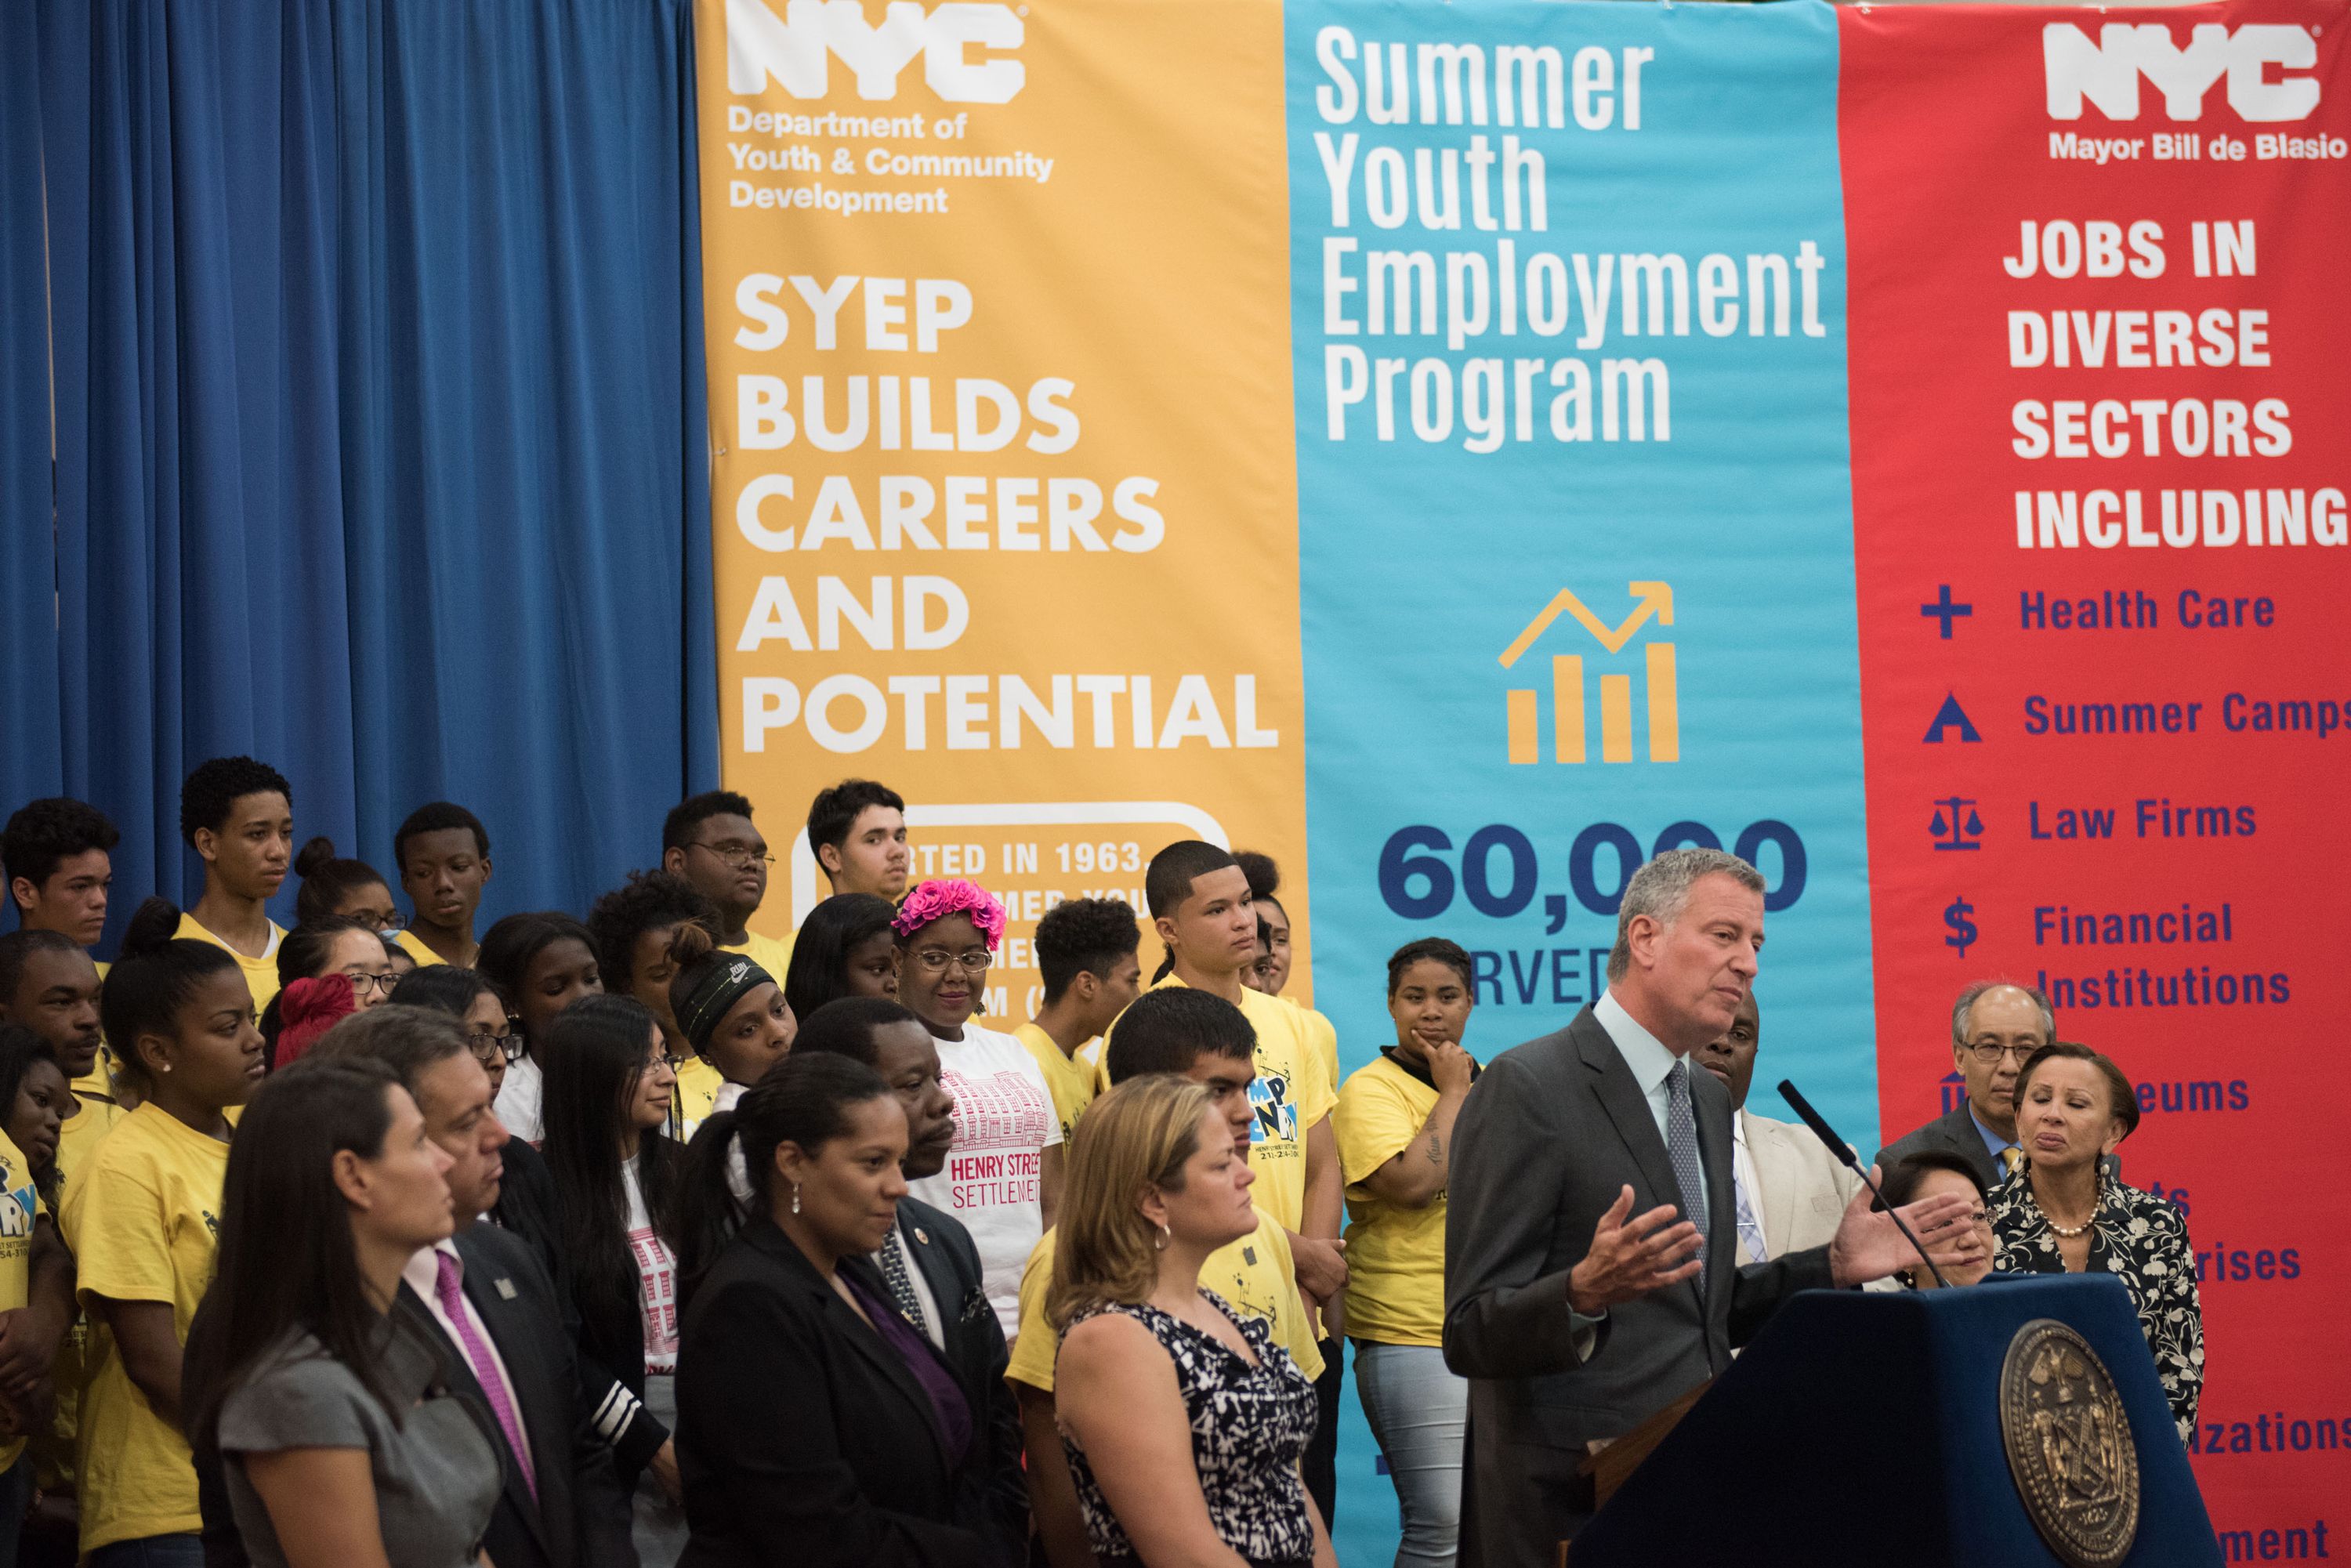 Mayor Bill de Blasio speaks at an event for the Summer Youth Employment Program in 2016.